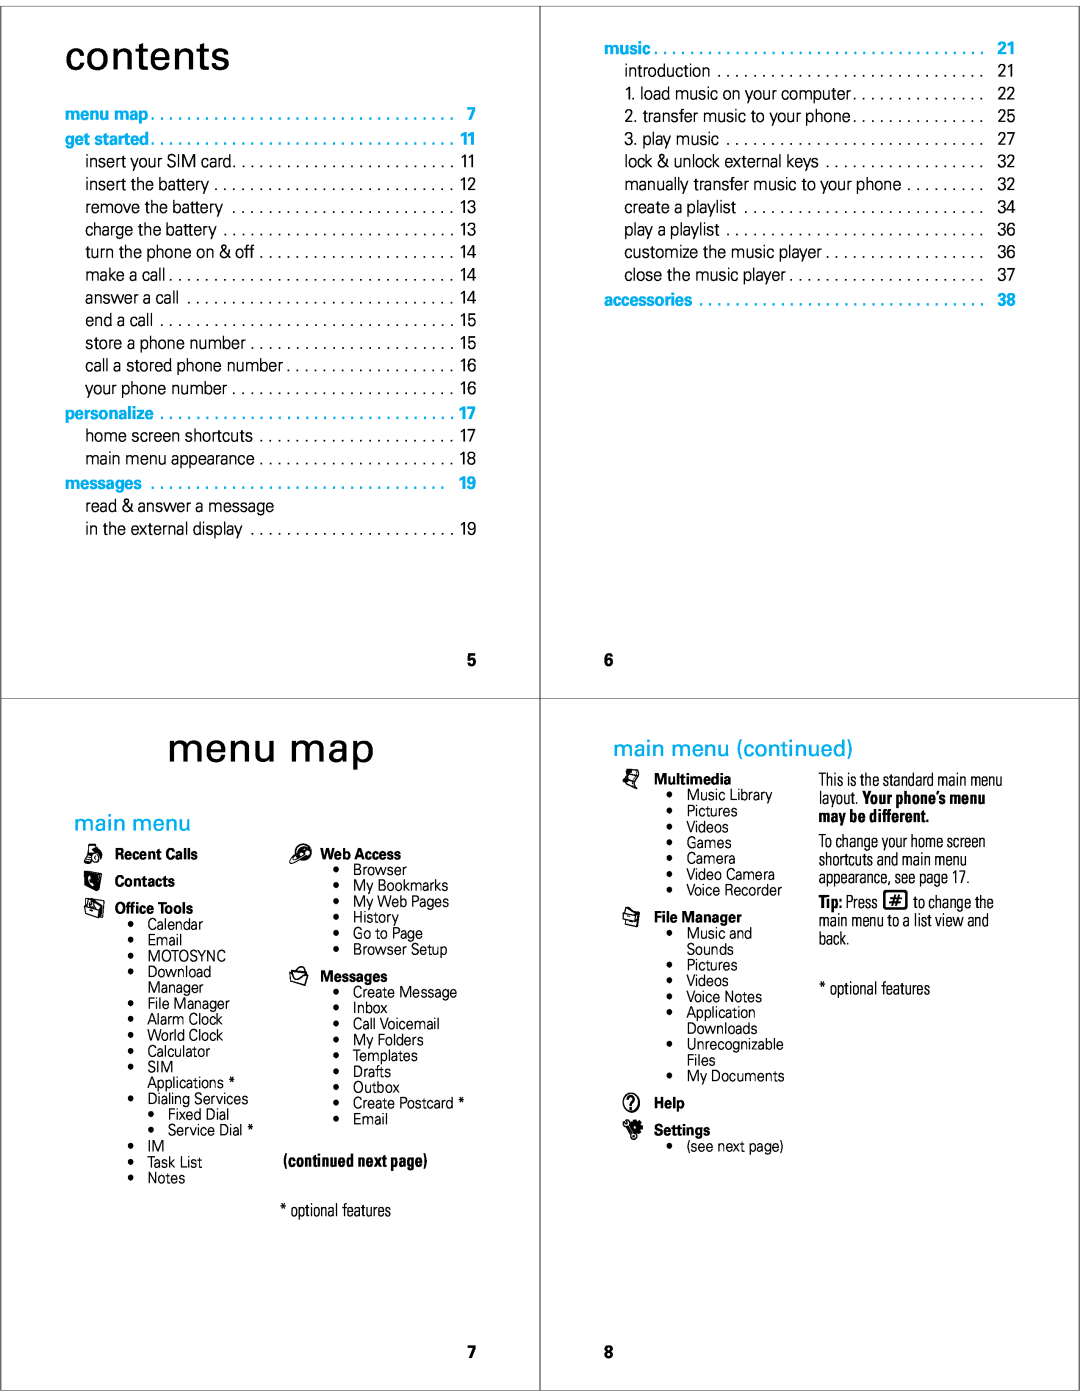 Motorola V8 manual contents, menu map, main menu continued, personalize, messages, may be different, continued next page 